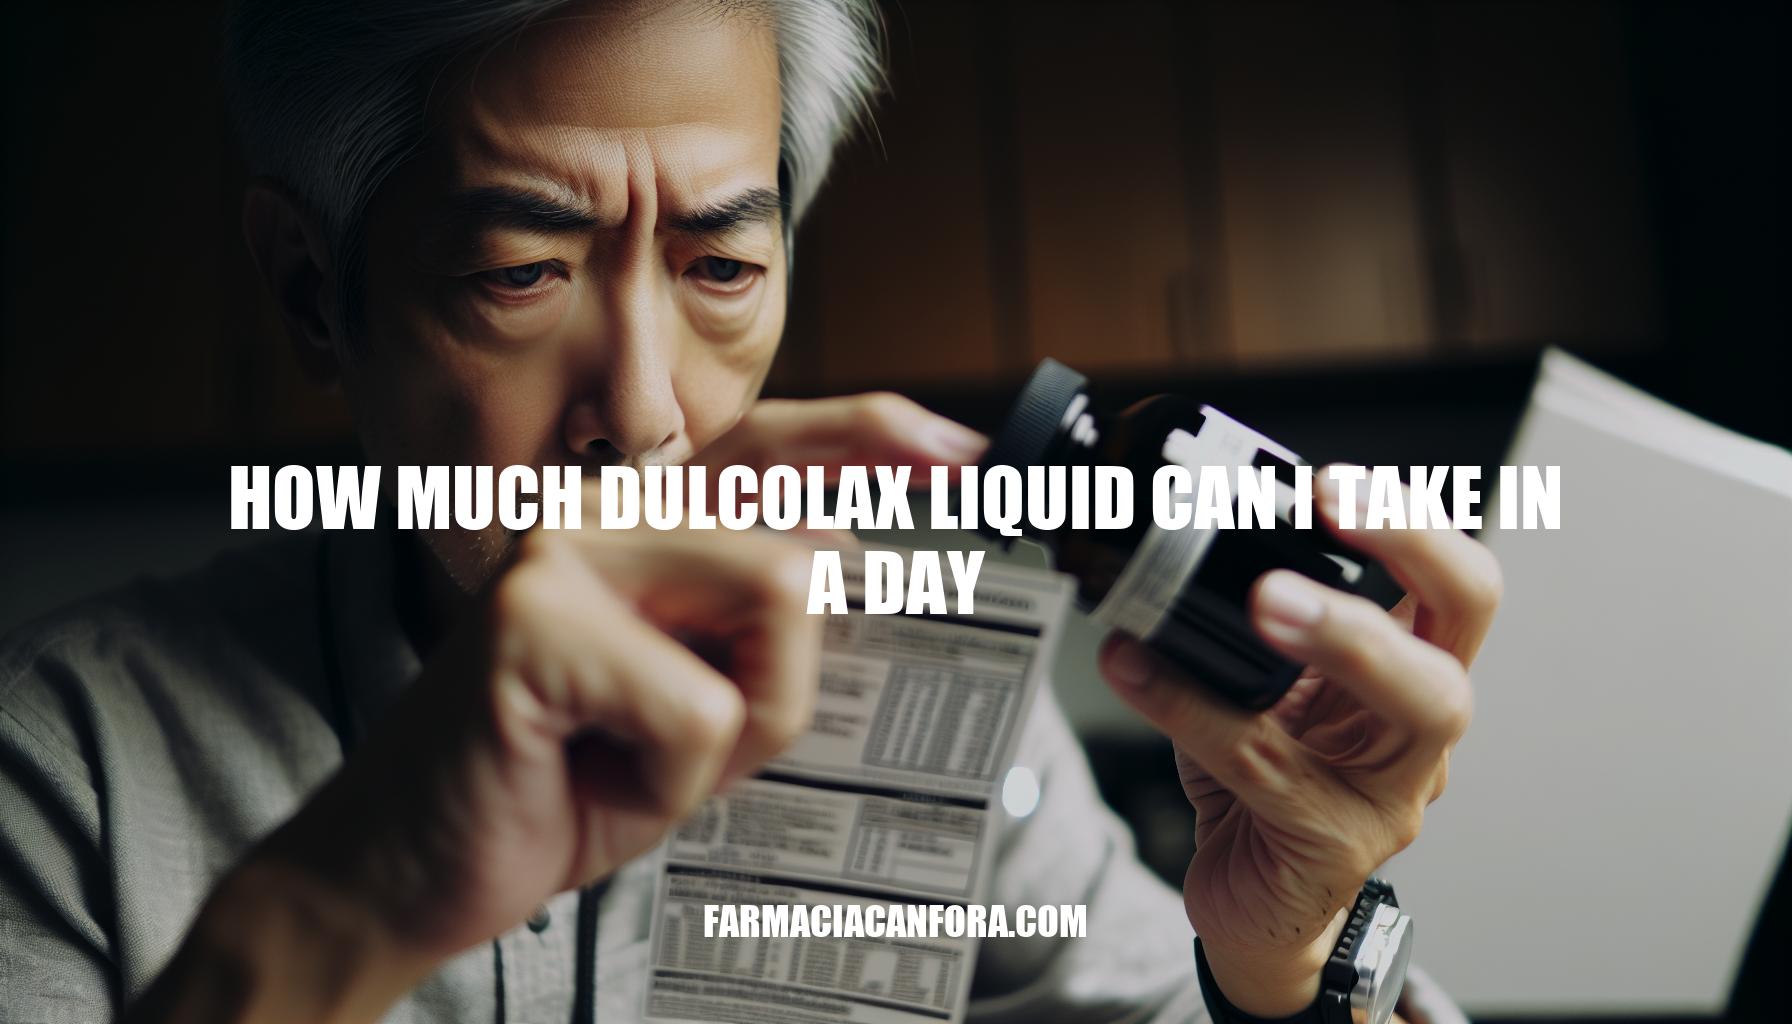 How Much Dulcolax Liquid Can I Take in a Day: Dosage Guide